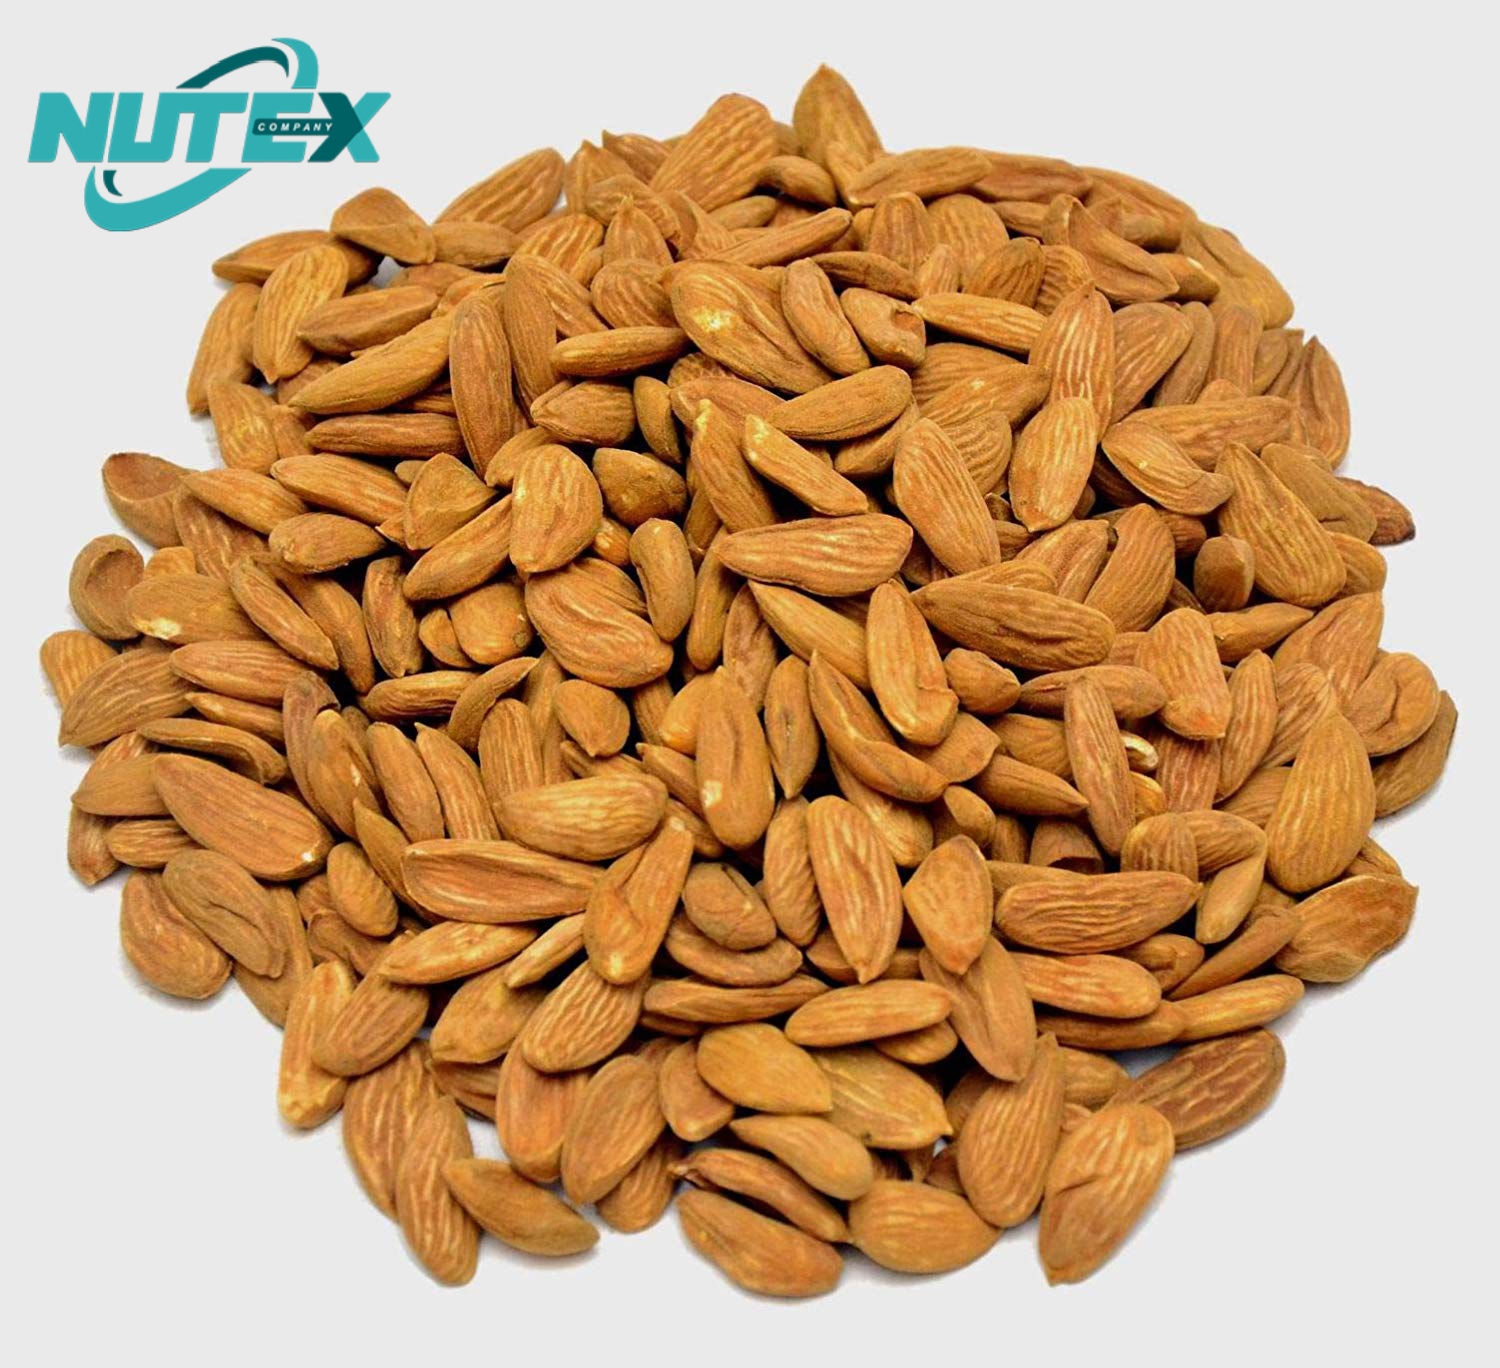  Mamra Almond Suppliers in Asia | Iranian Nuts 